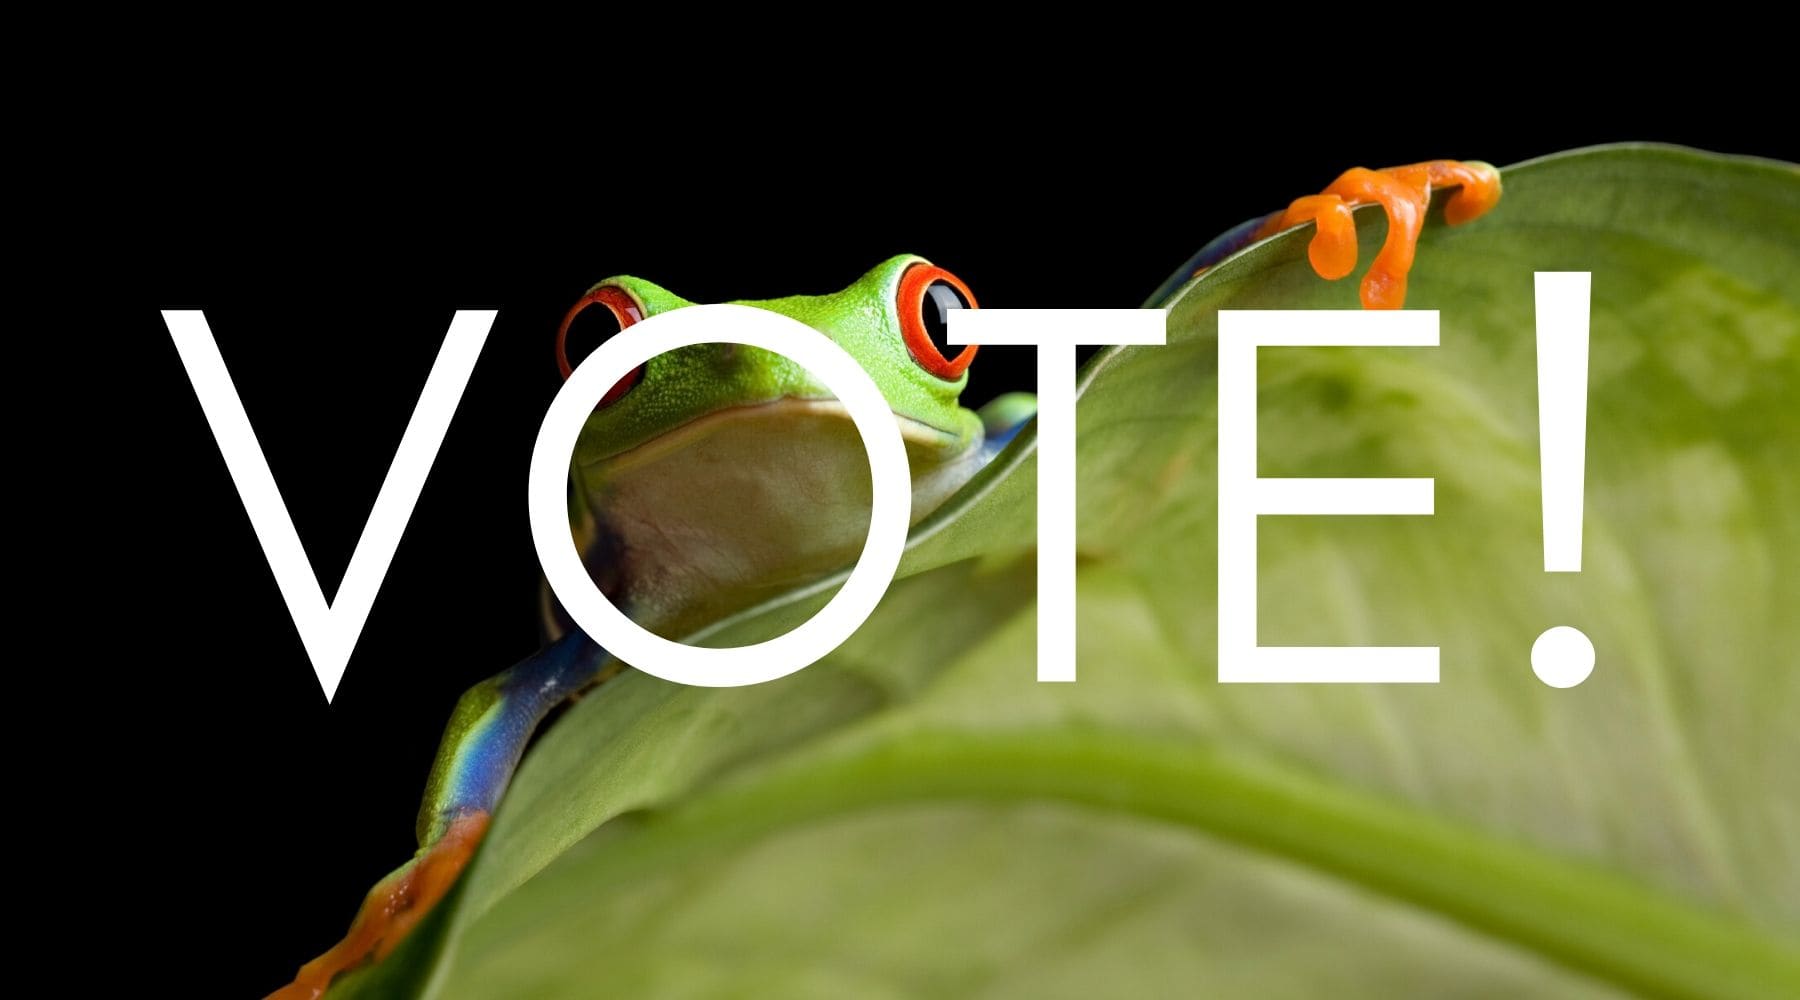 Science Shepherd Homeschool Family Favorite tree frog with Vote! text